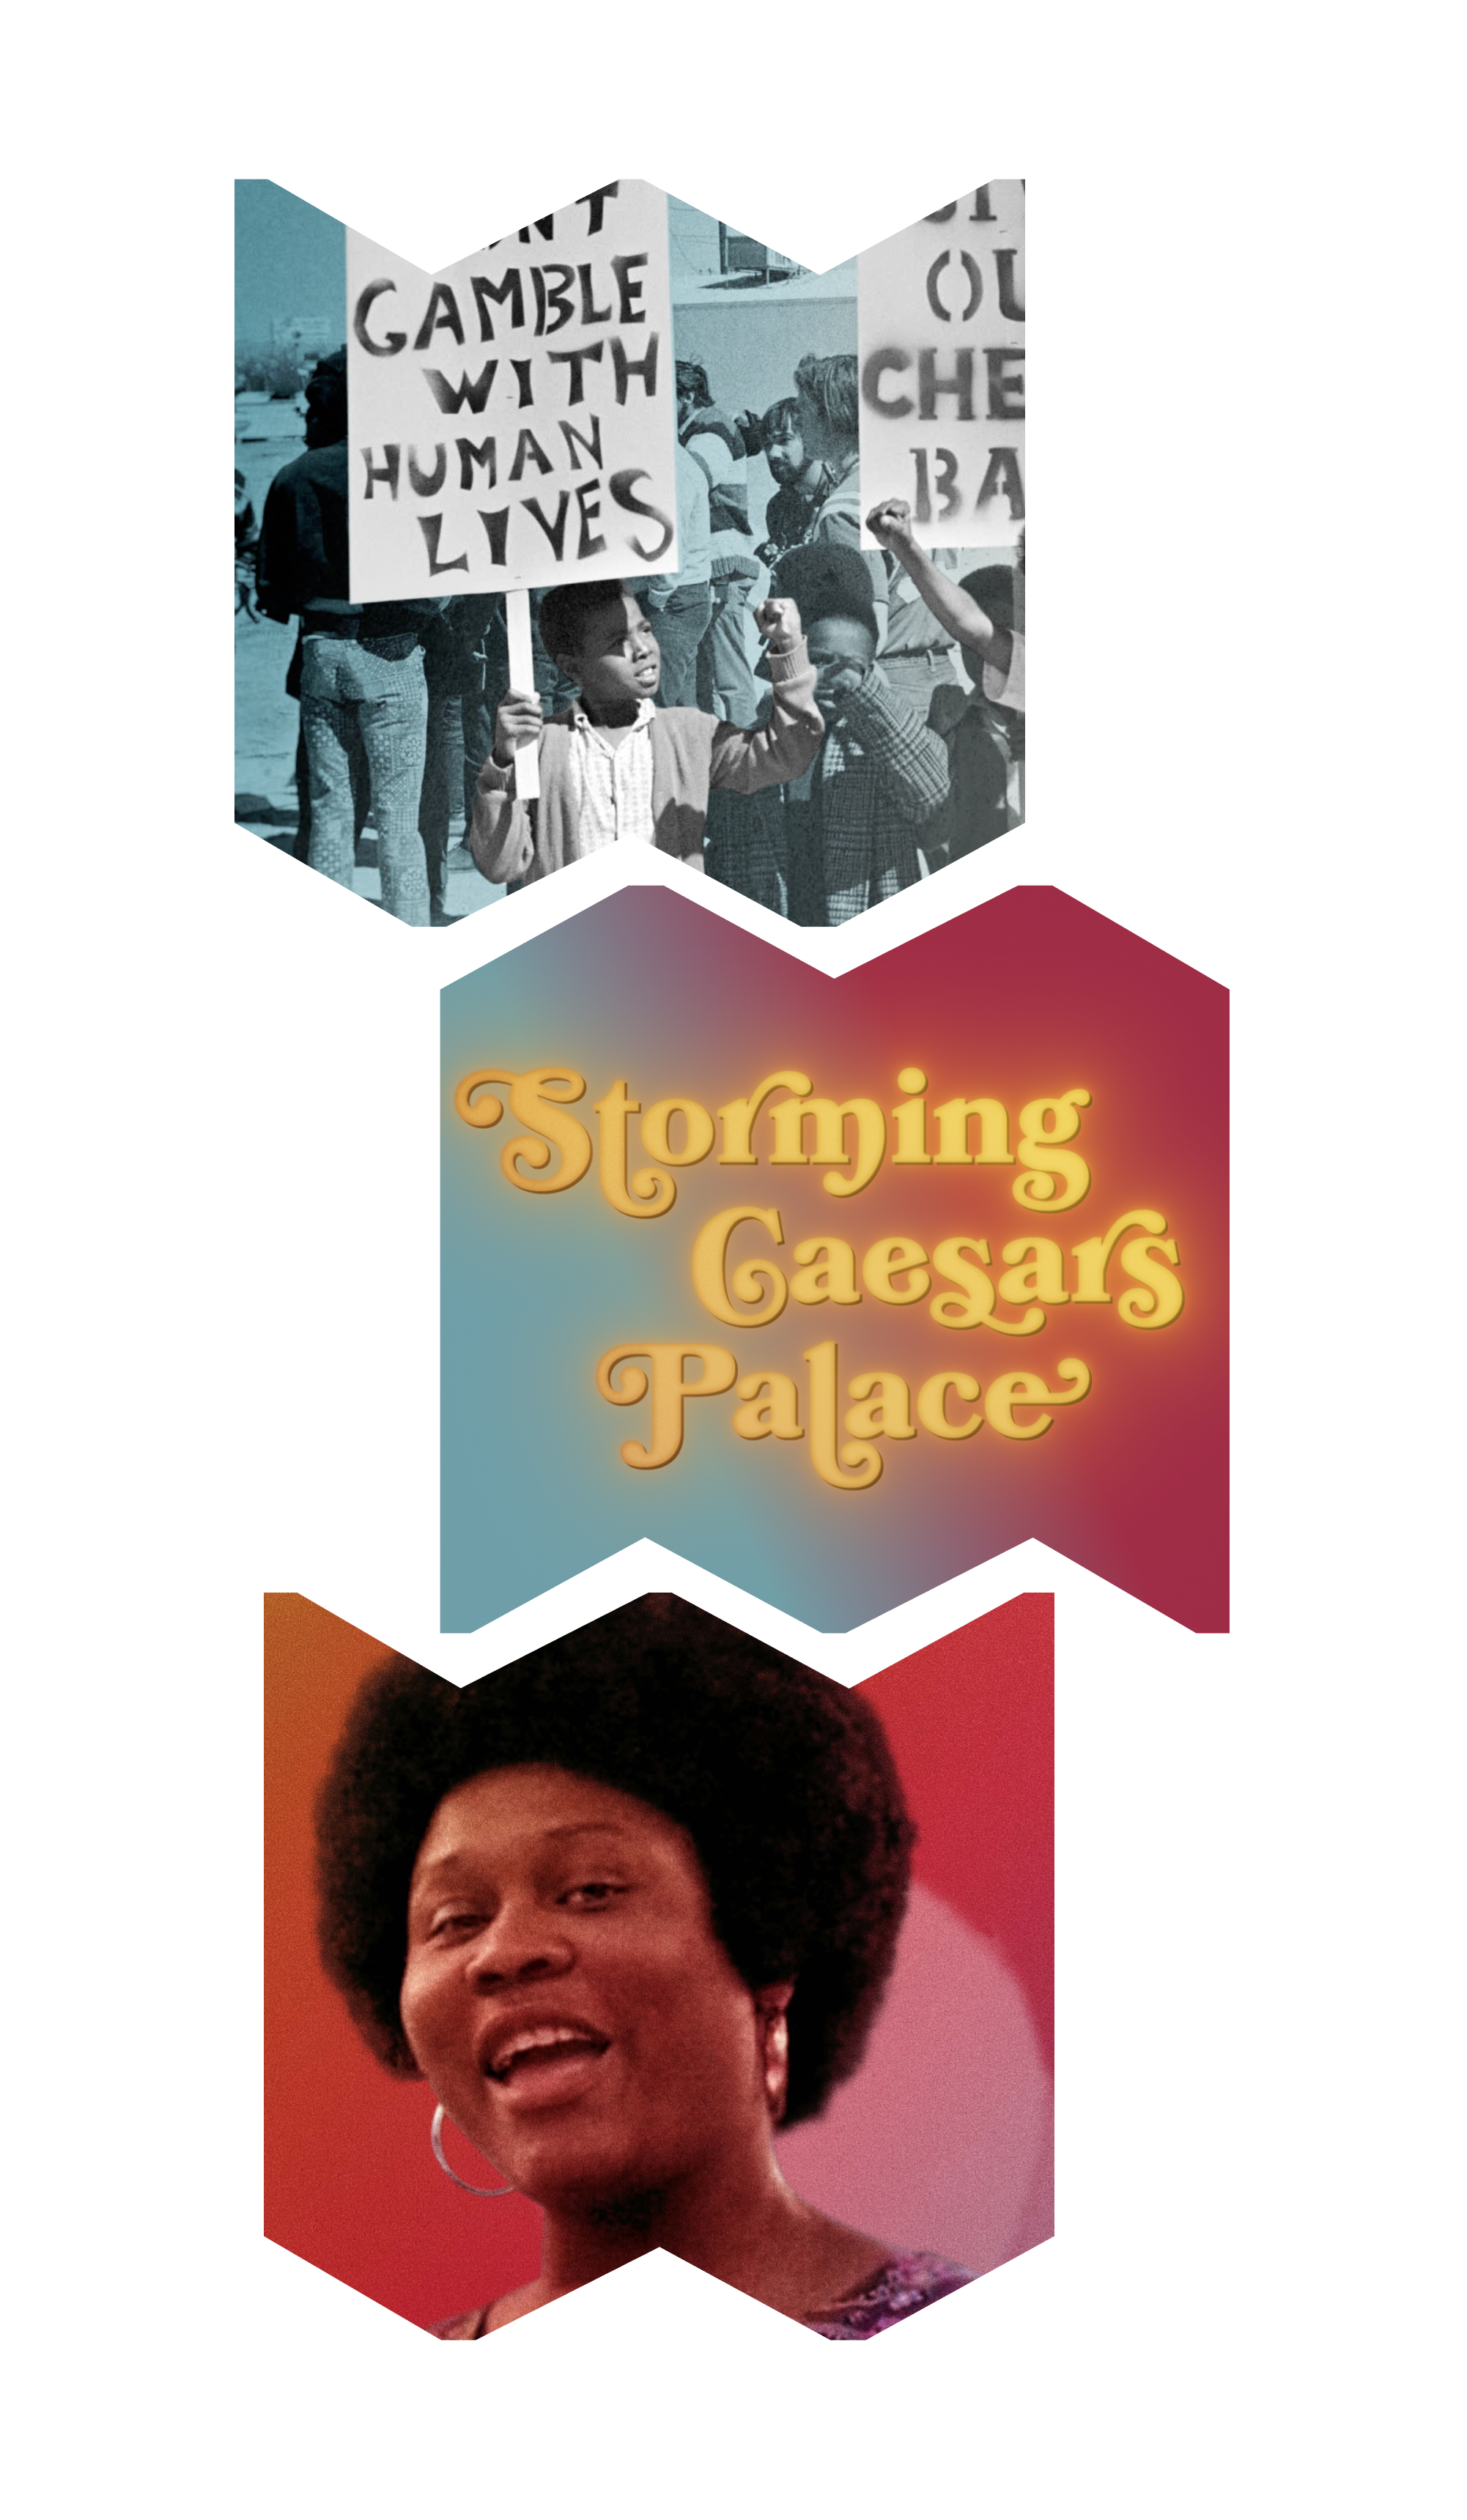 In top "W" frame, black and white picture of kids protesting with a teal tint; middle "M" frame shows blue and red gradient behind the words "Storming Caesars Palace"; and in bottom "W" frame a close-up of Ruby Duncan with a red tint.